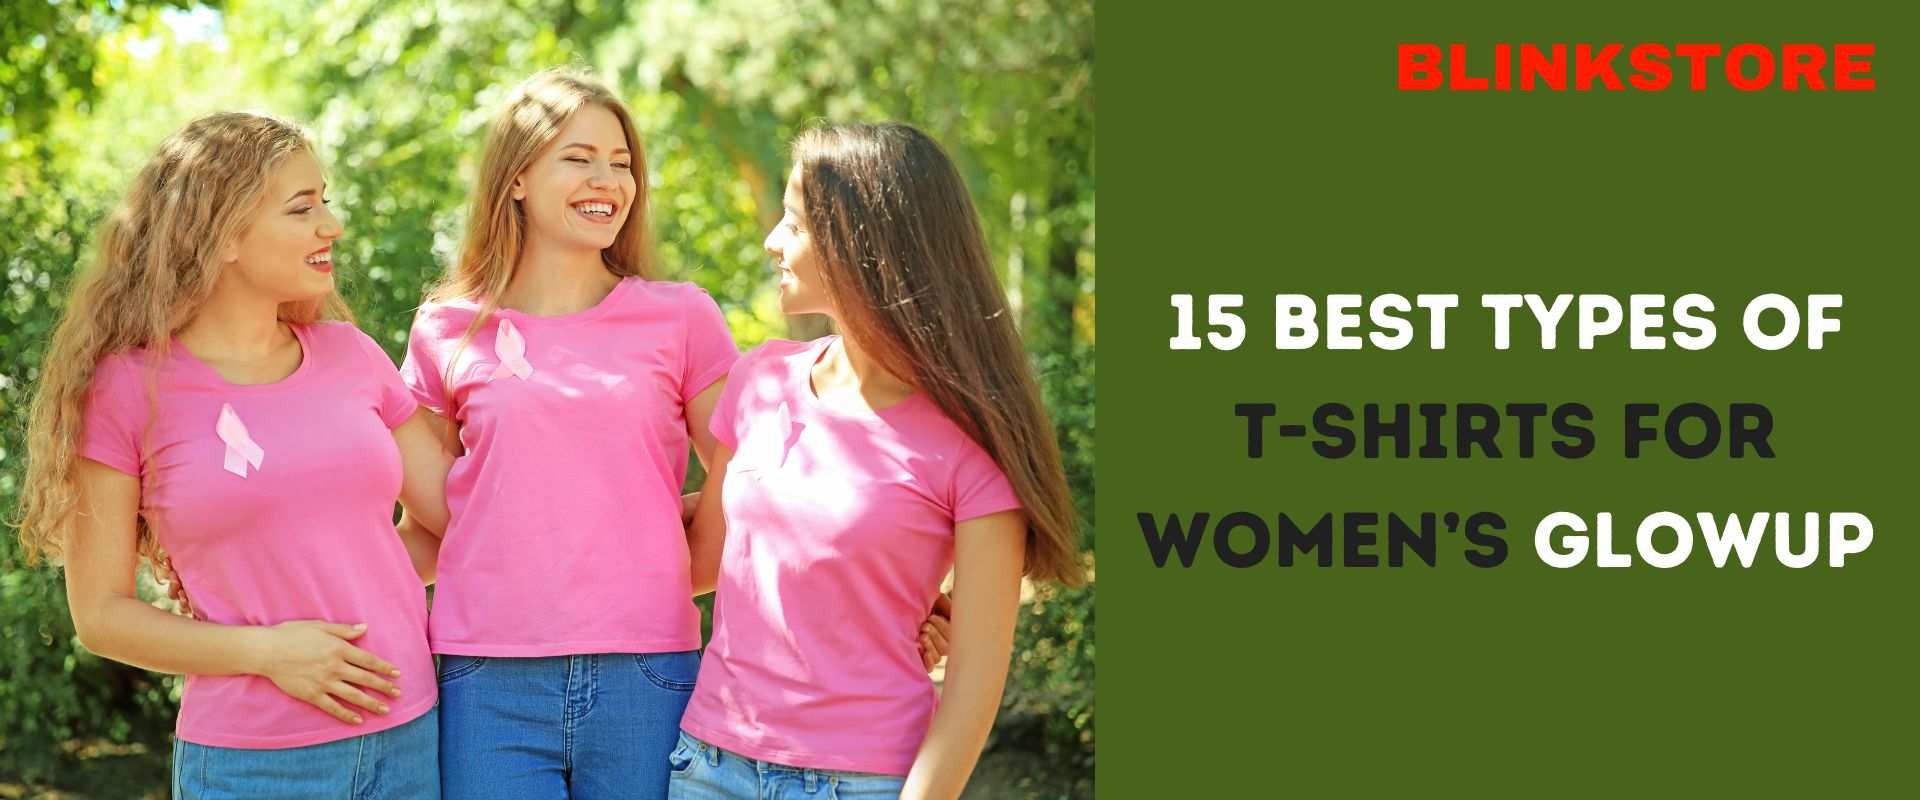 Types of T-shirts for Women